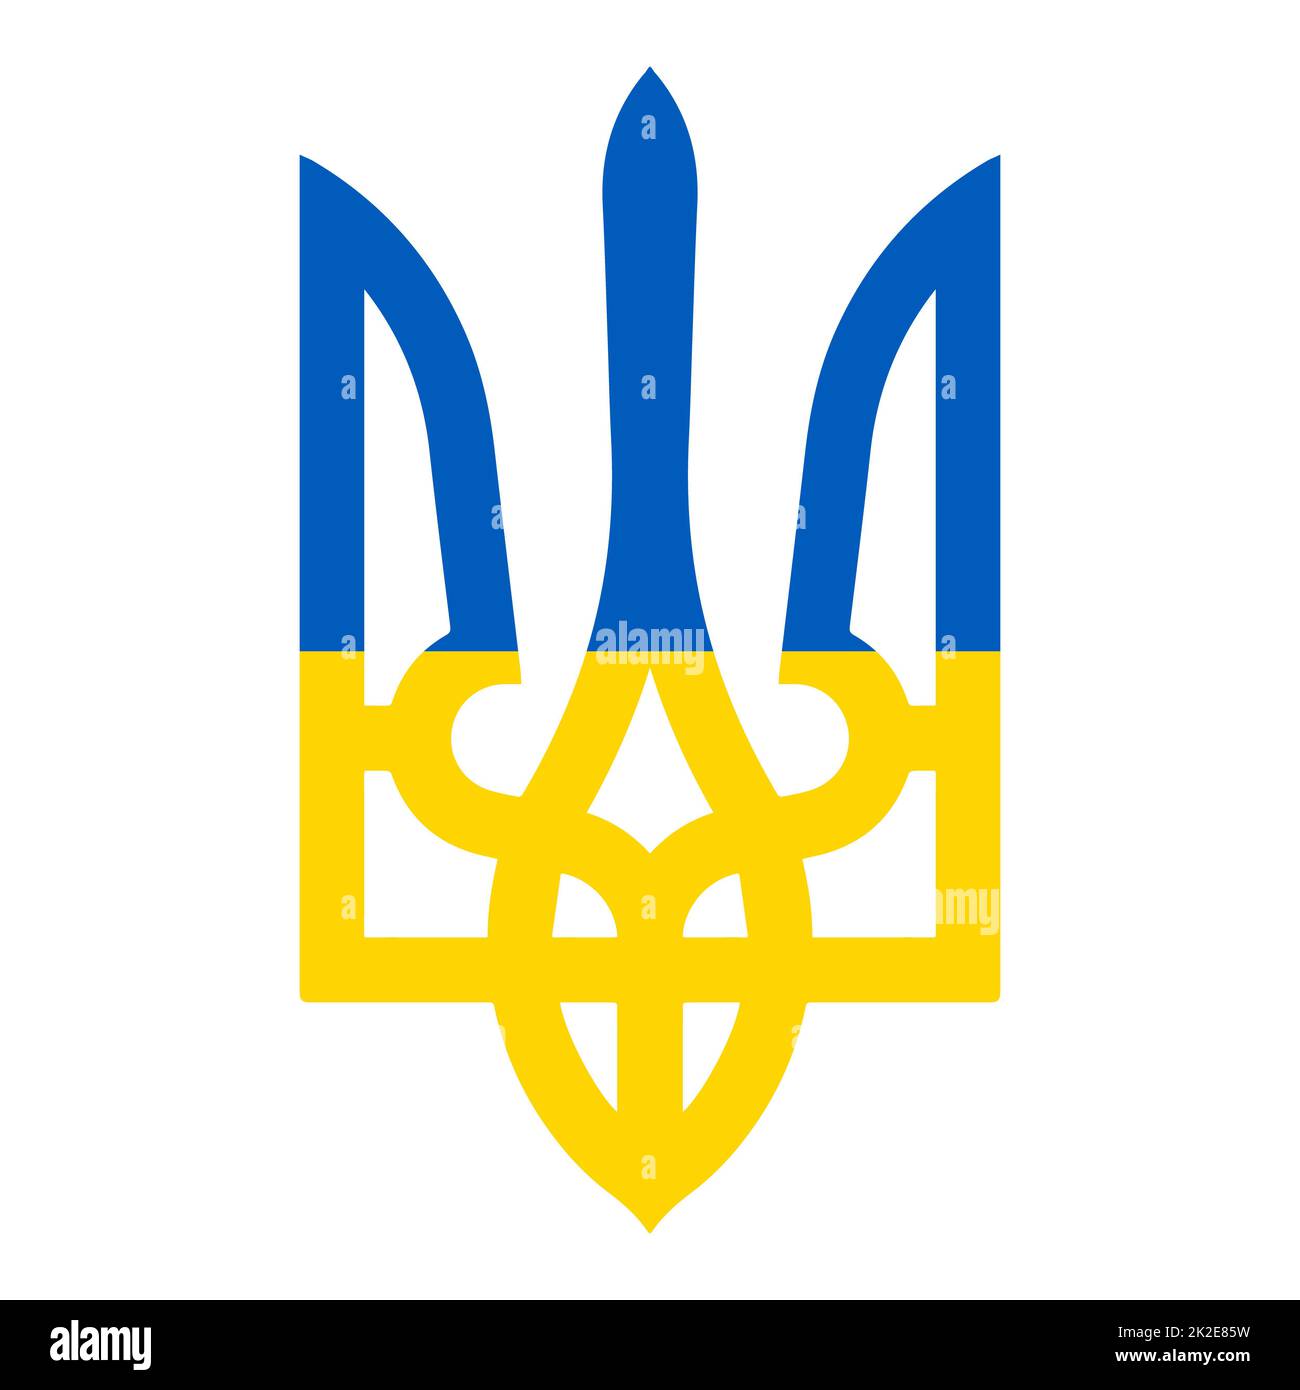 Yellow blue trident - vector illustration. The small coat of arms of Ukraine - tryzub is one of the three official symbols of the state. National Ukrainian emblem - Trident in national flag colors. Stock Photo